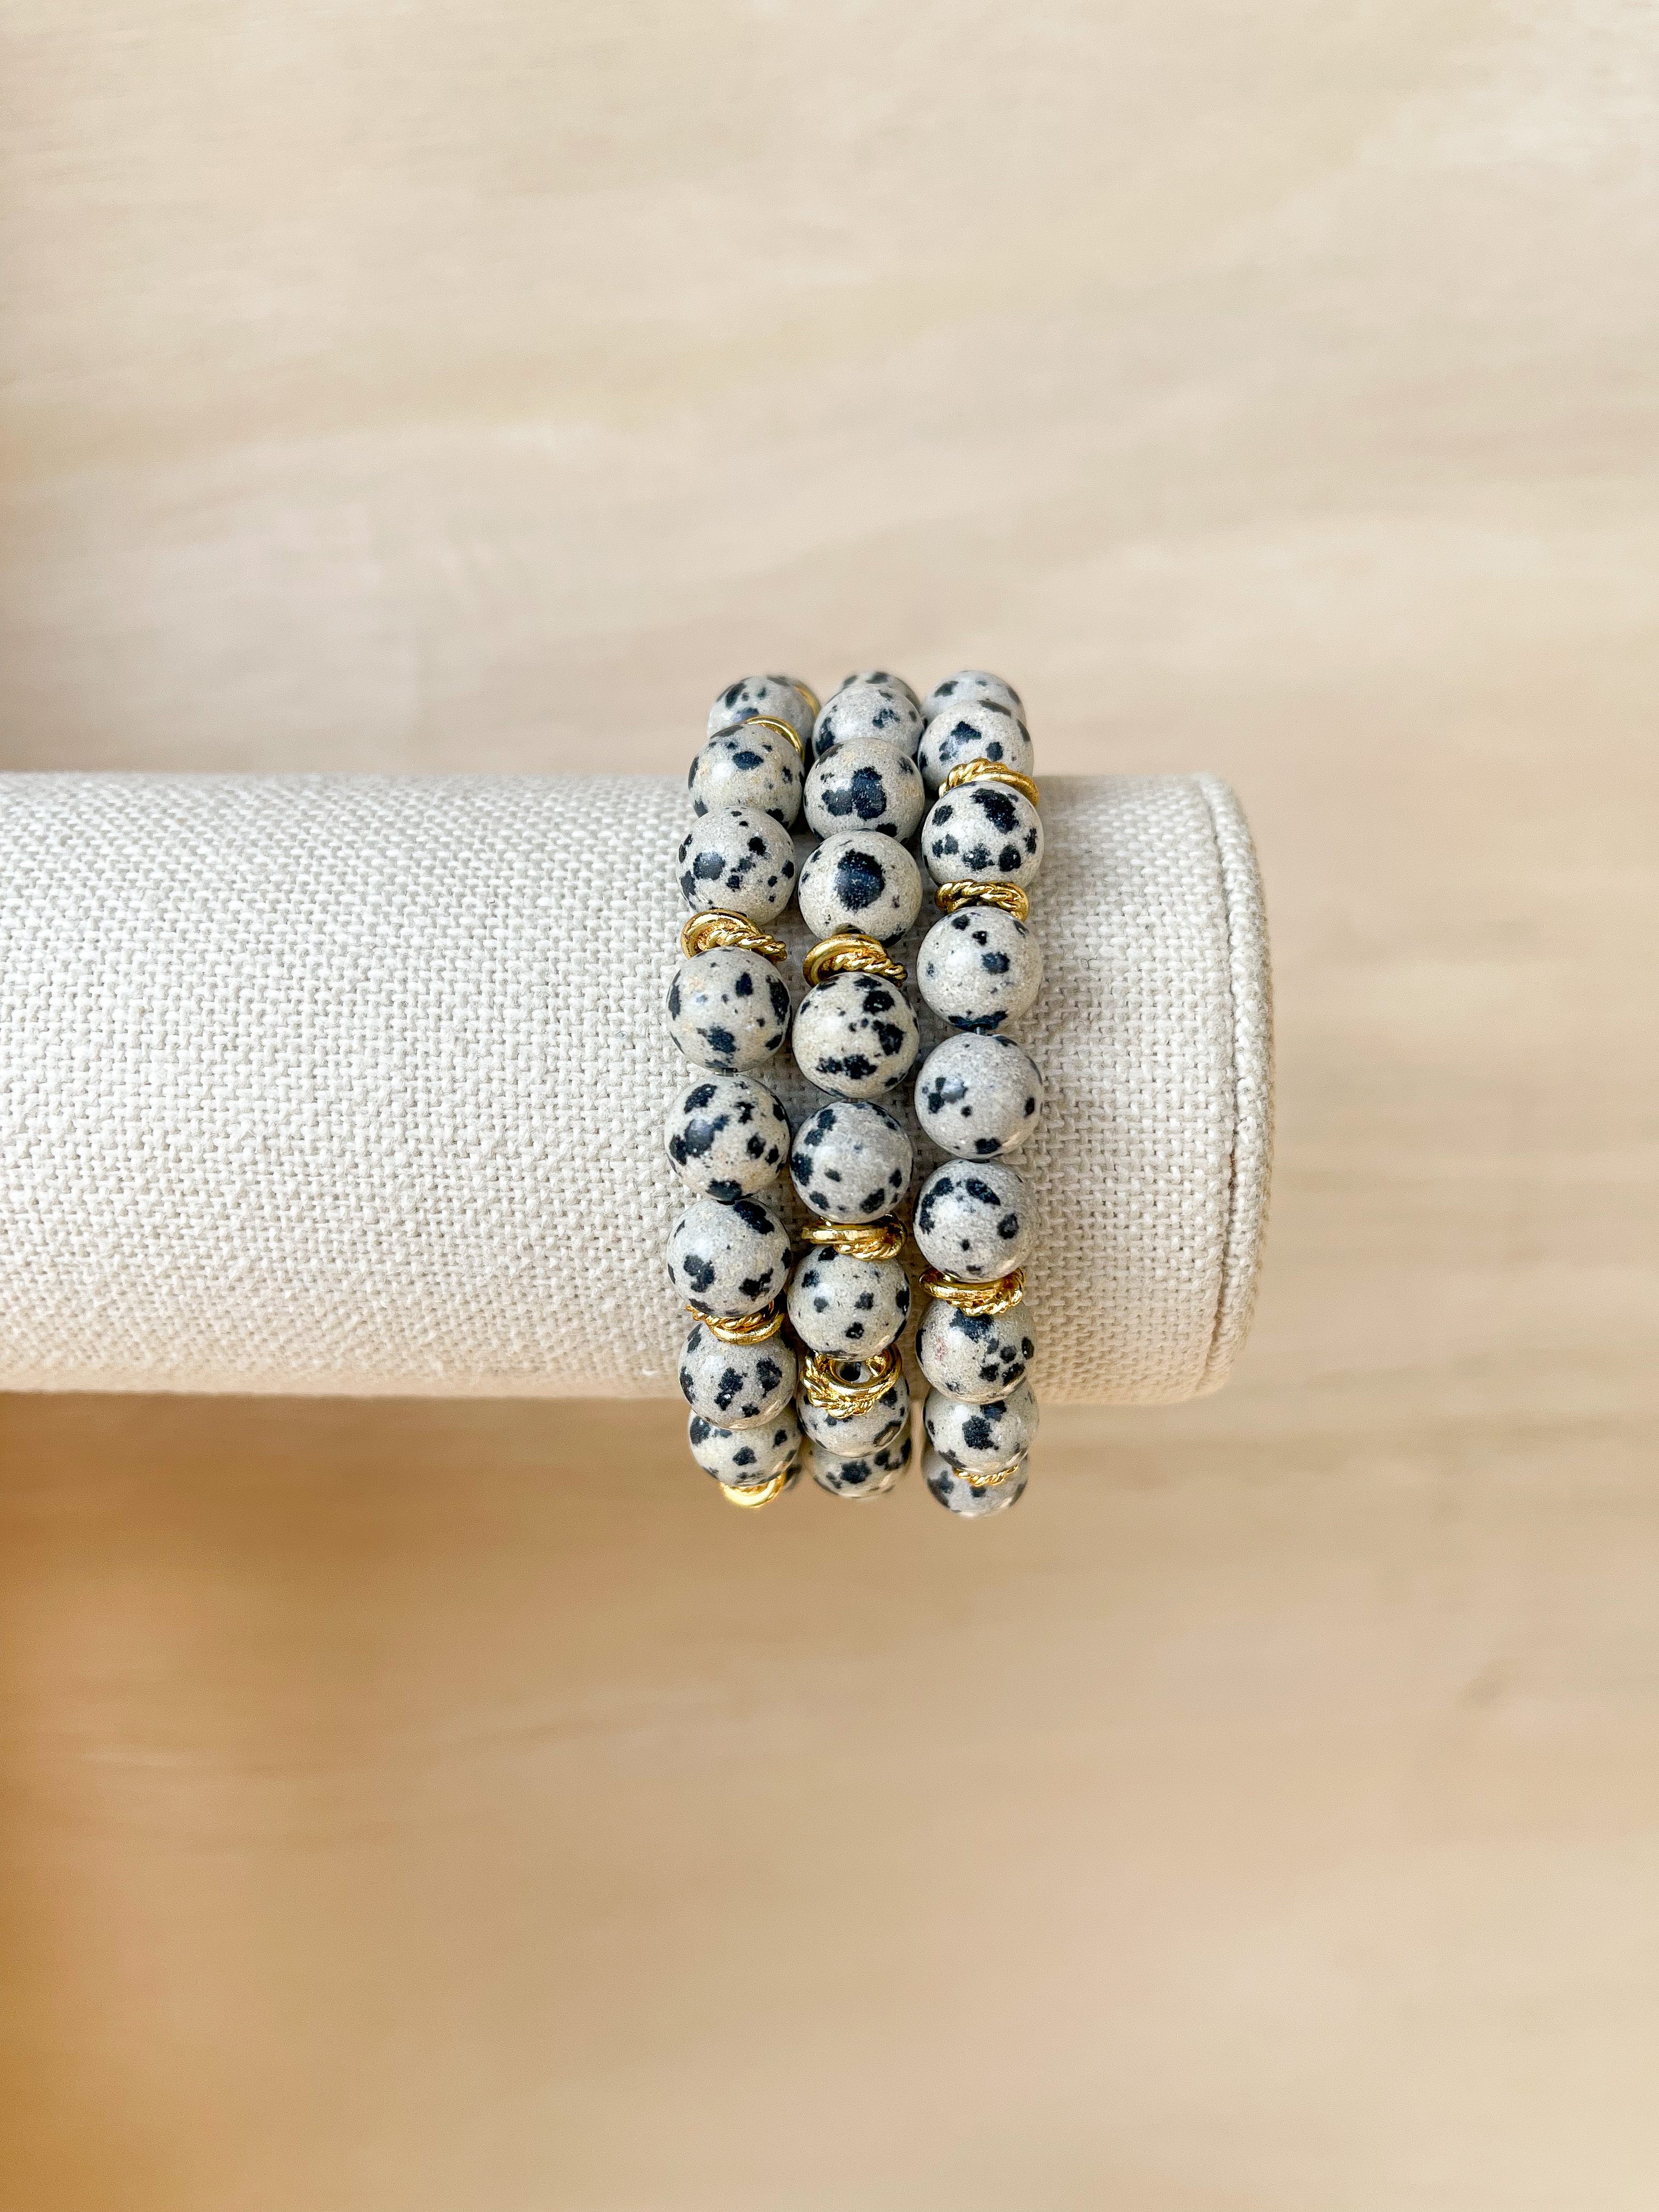 Handmade bracelet, locally made, soft clay bead, stretch bracelet, black and grey speckled beads separated with gold spacers